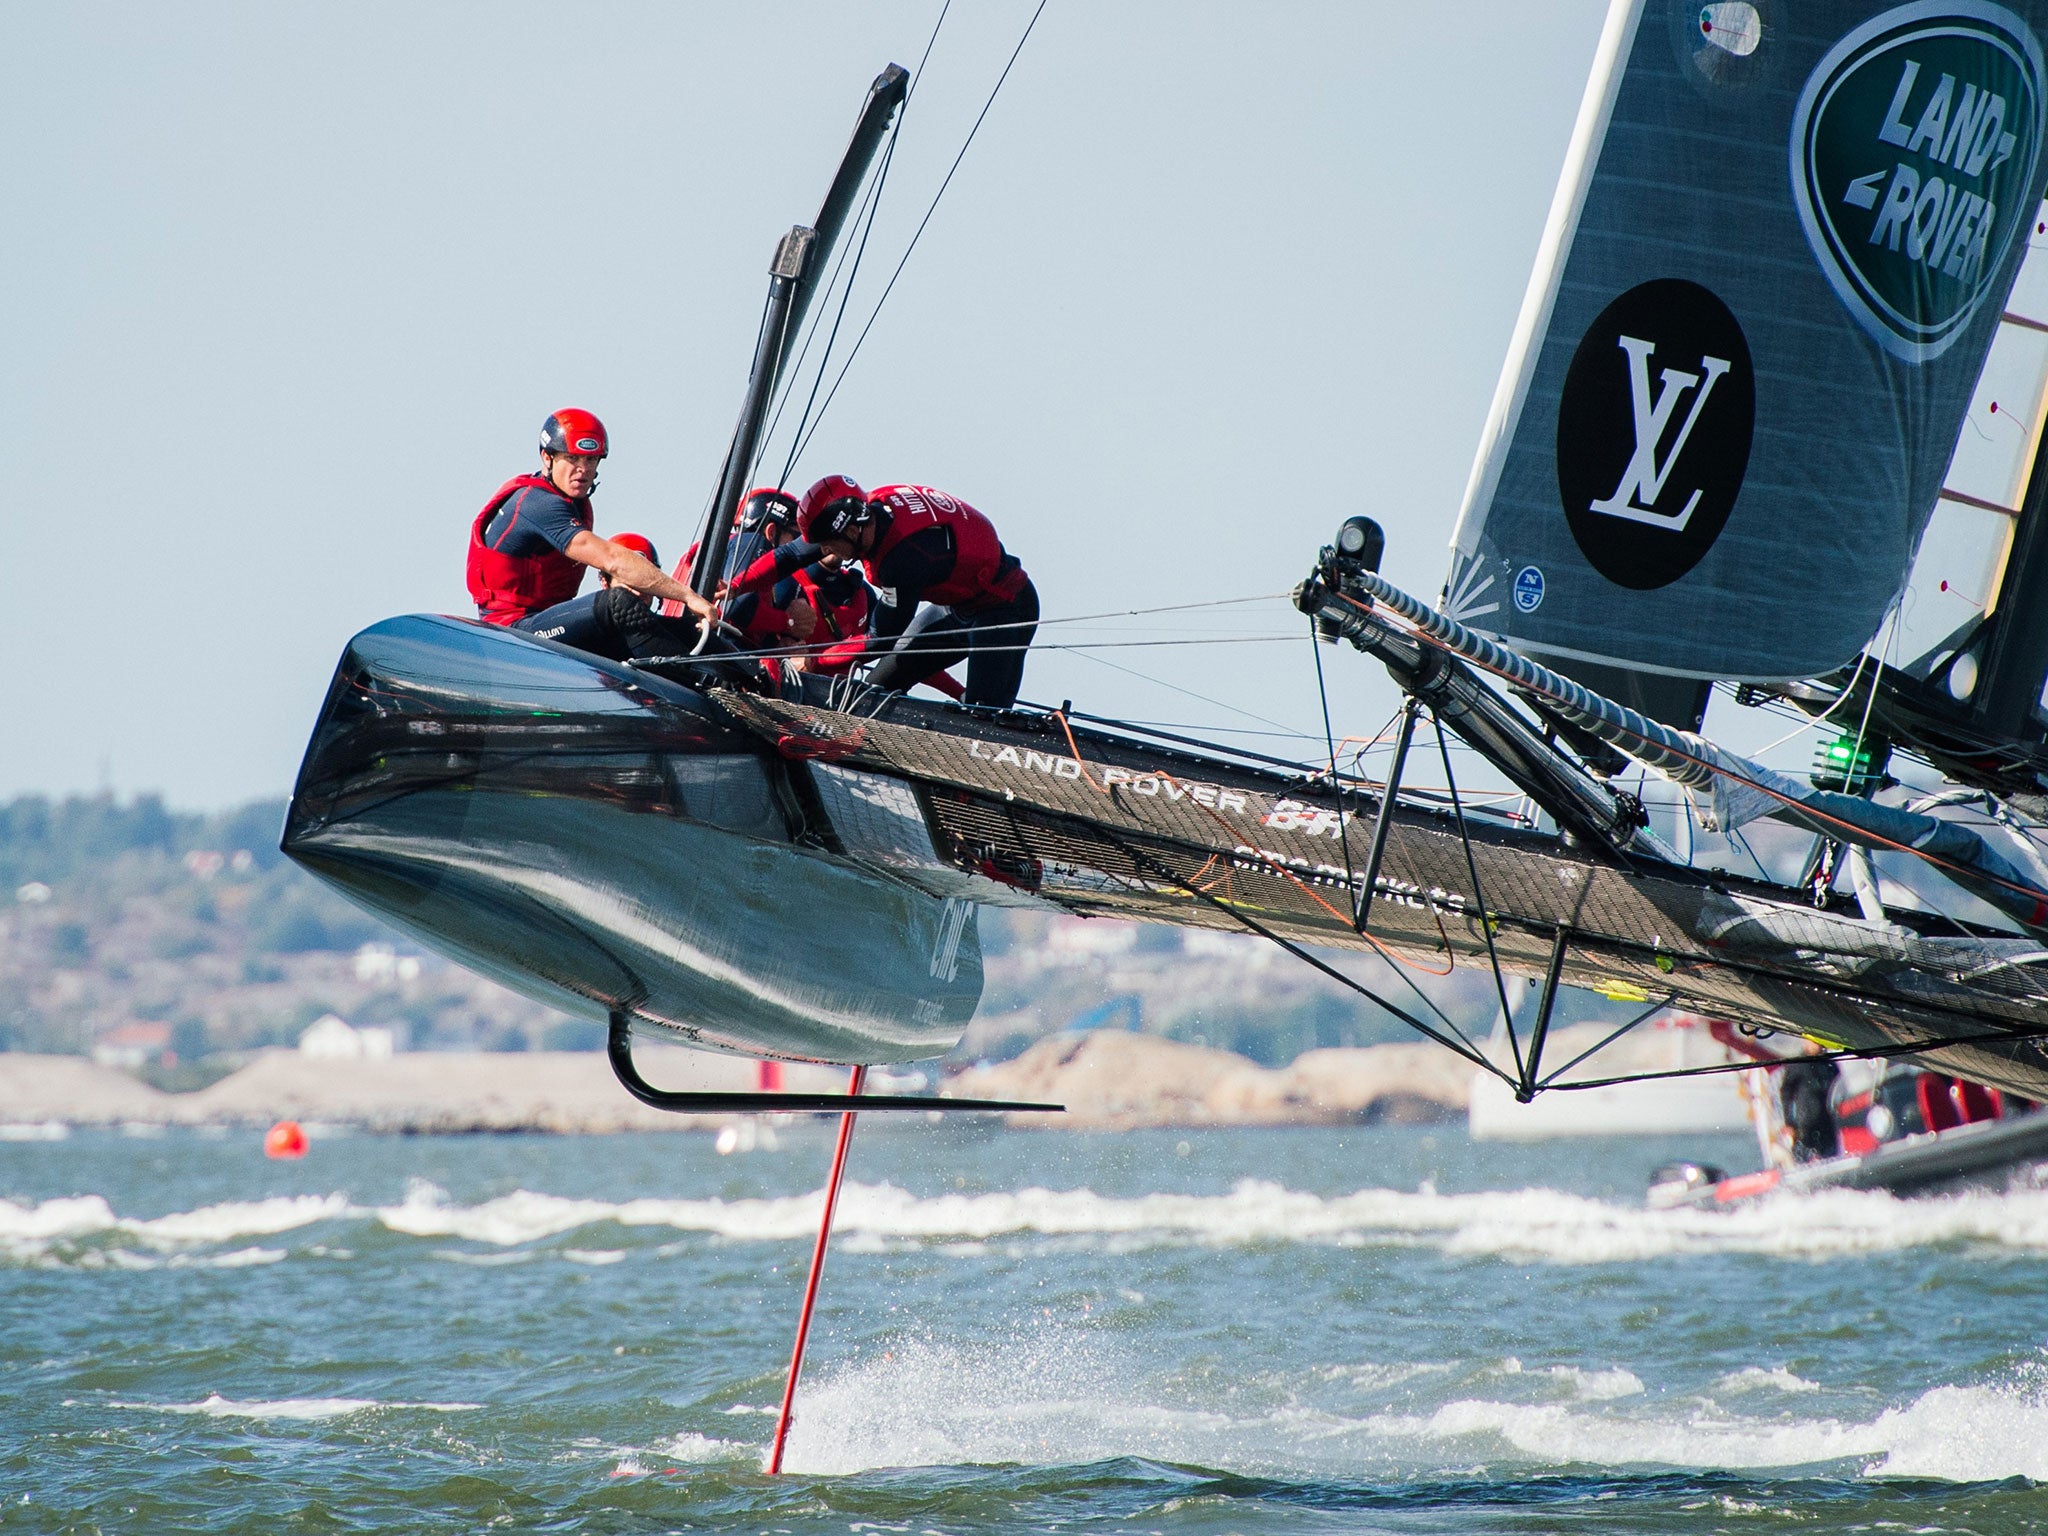 Team Land Rover BAR Britain, skippered by Ben Ainslie, competes in the 35th America's Cup World Series, in Gothenburg, western Sweden